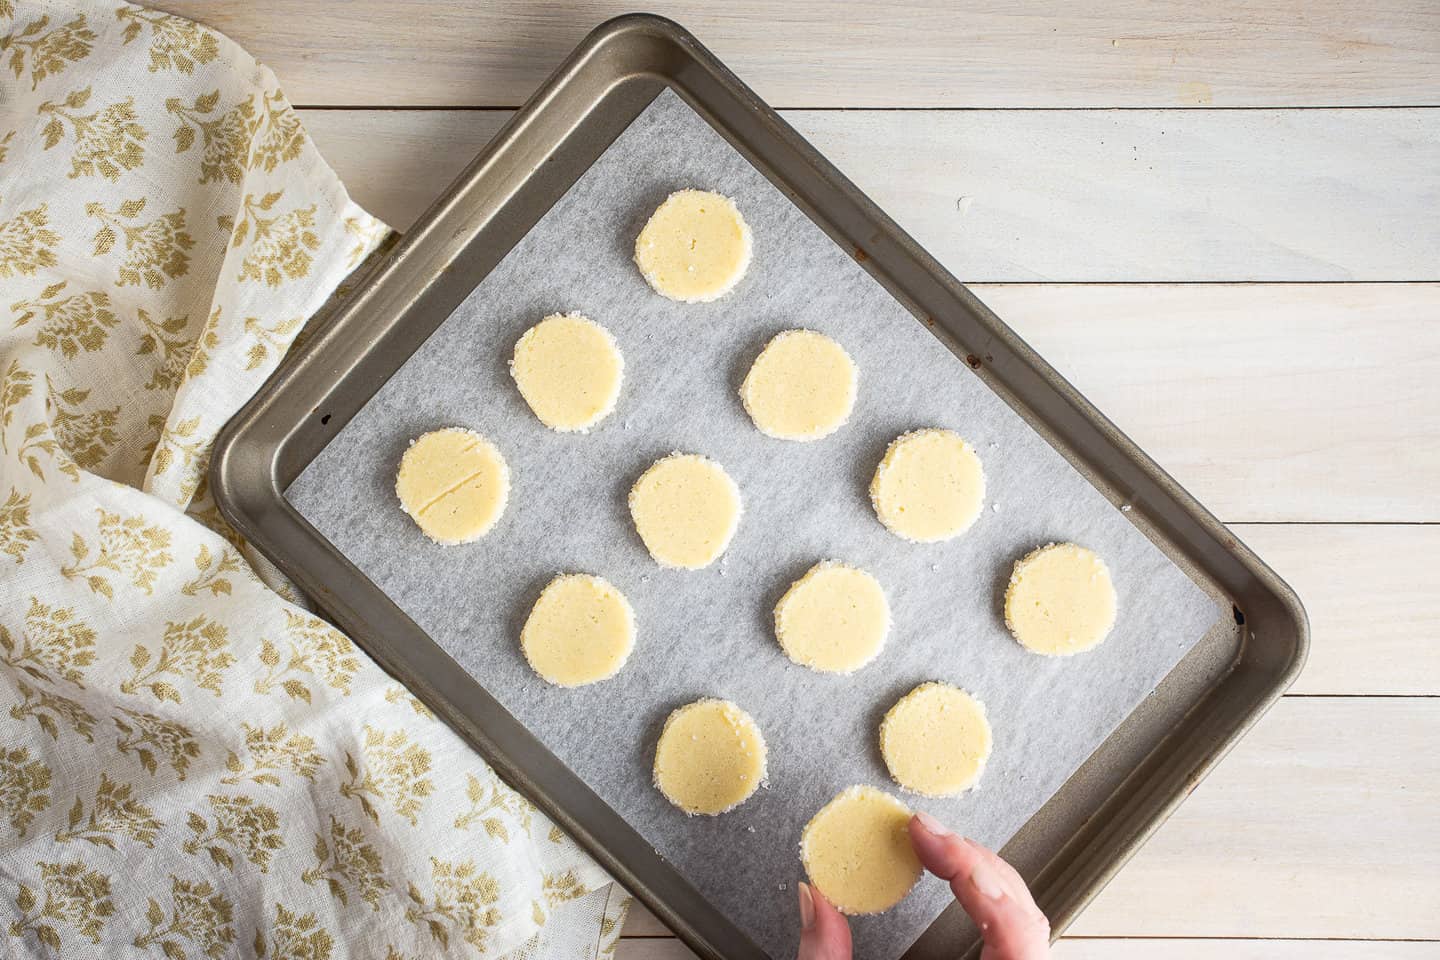 Unbaked butter cookies on a parchment-lined baking sheet.